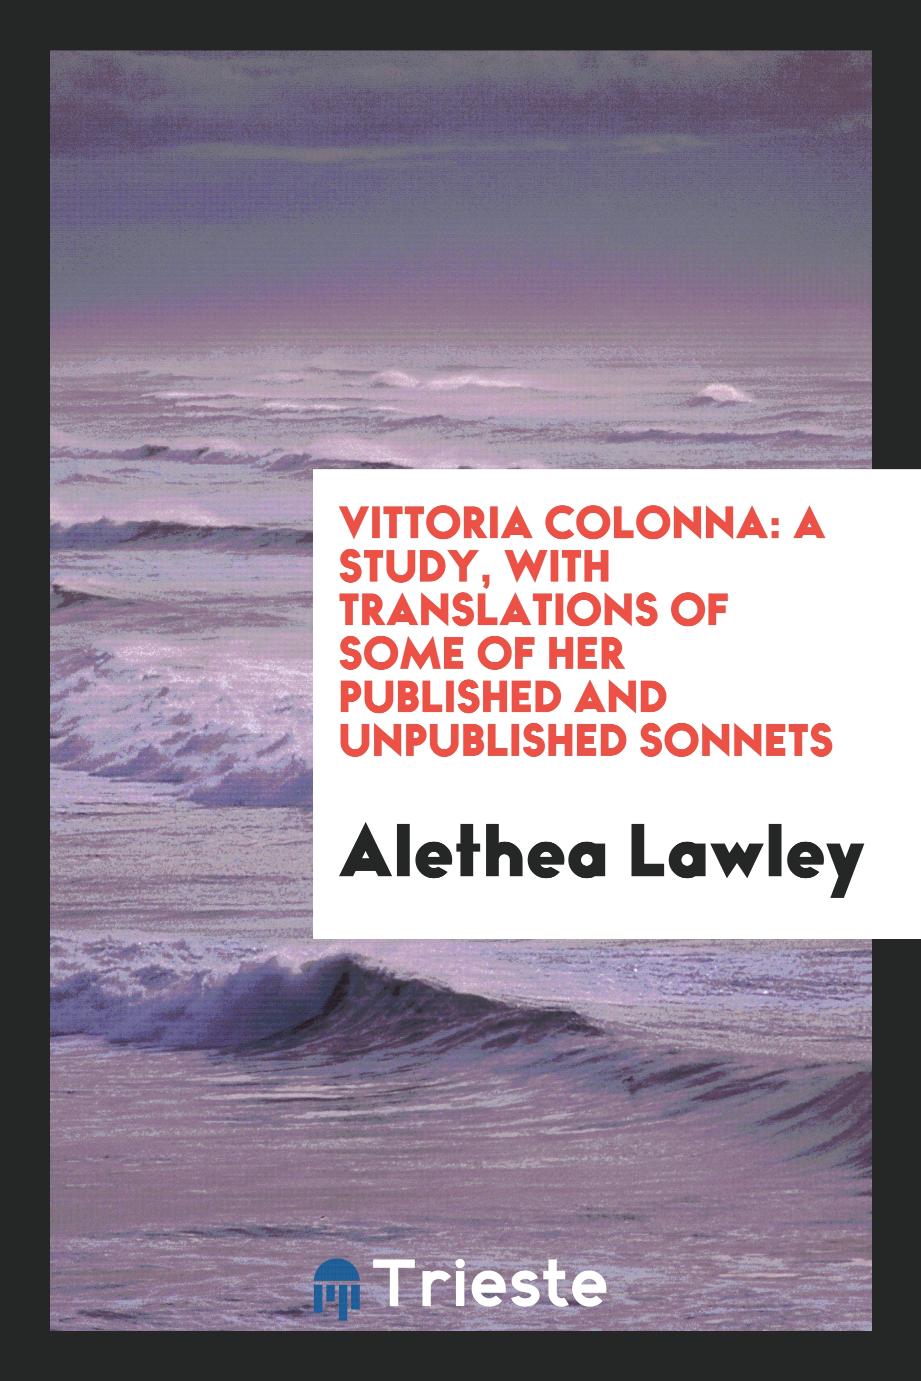 Vittoria Colonna: A Study, with Translations of Some of Her Published and Unpublished Sonnets